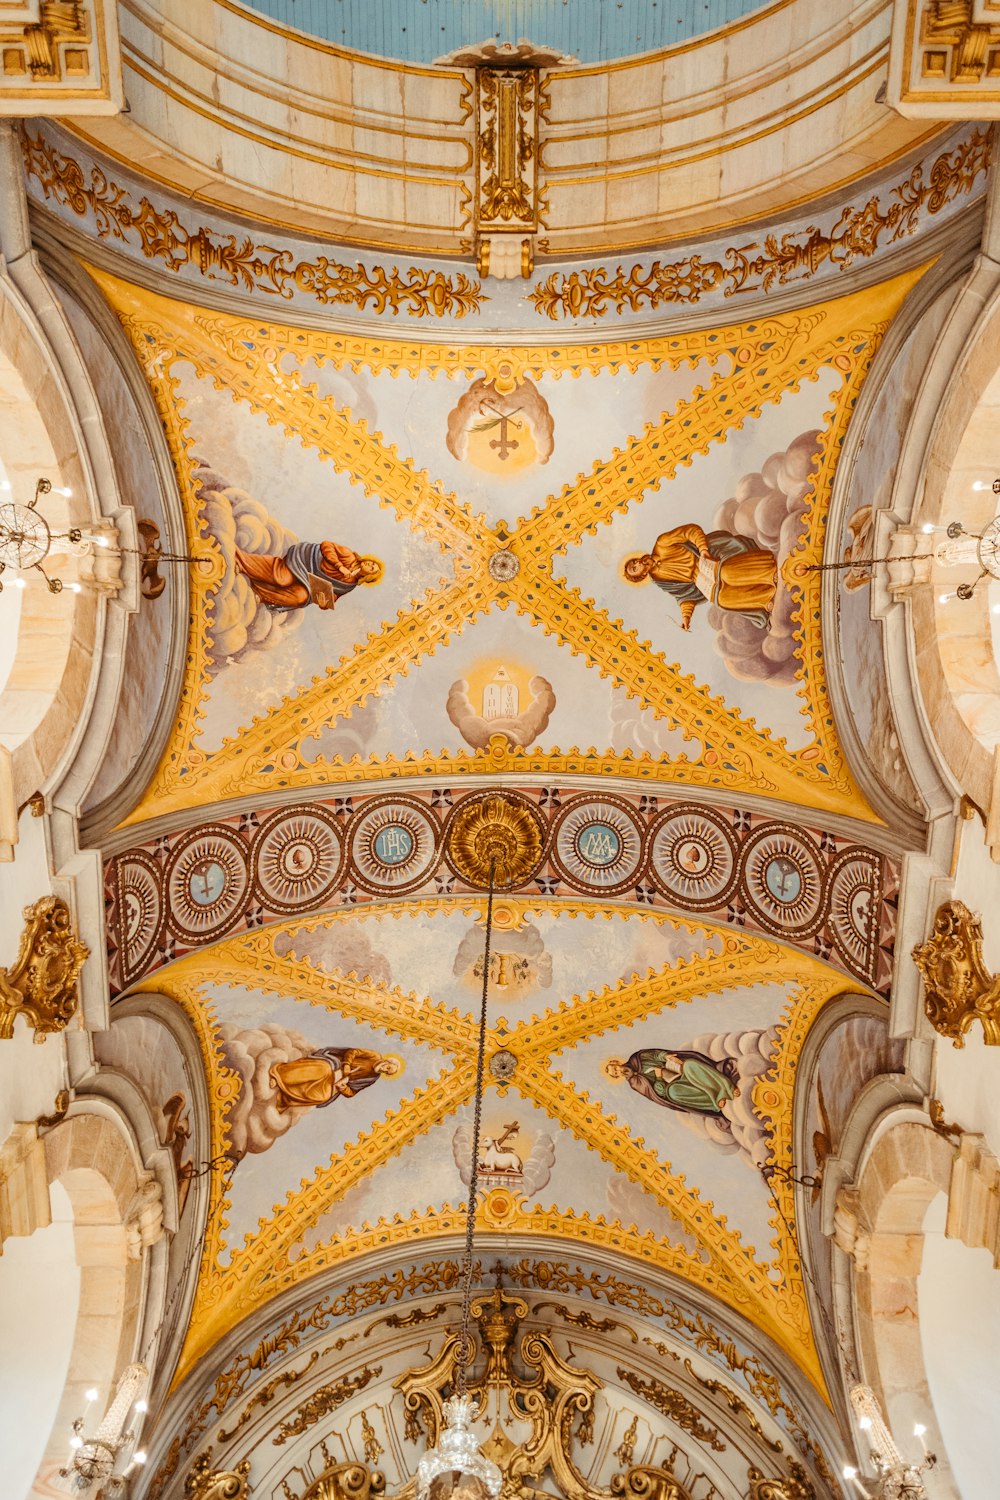 the ceiling of a church with a clock on it